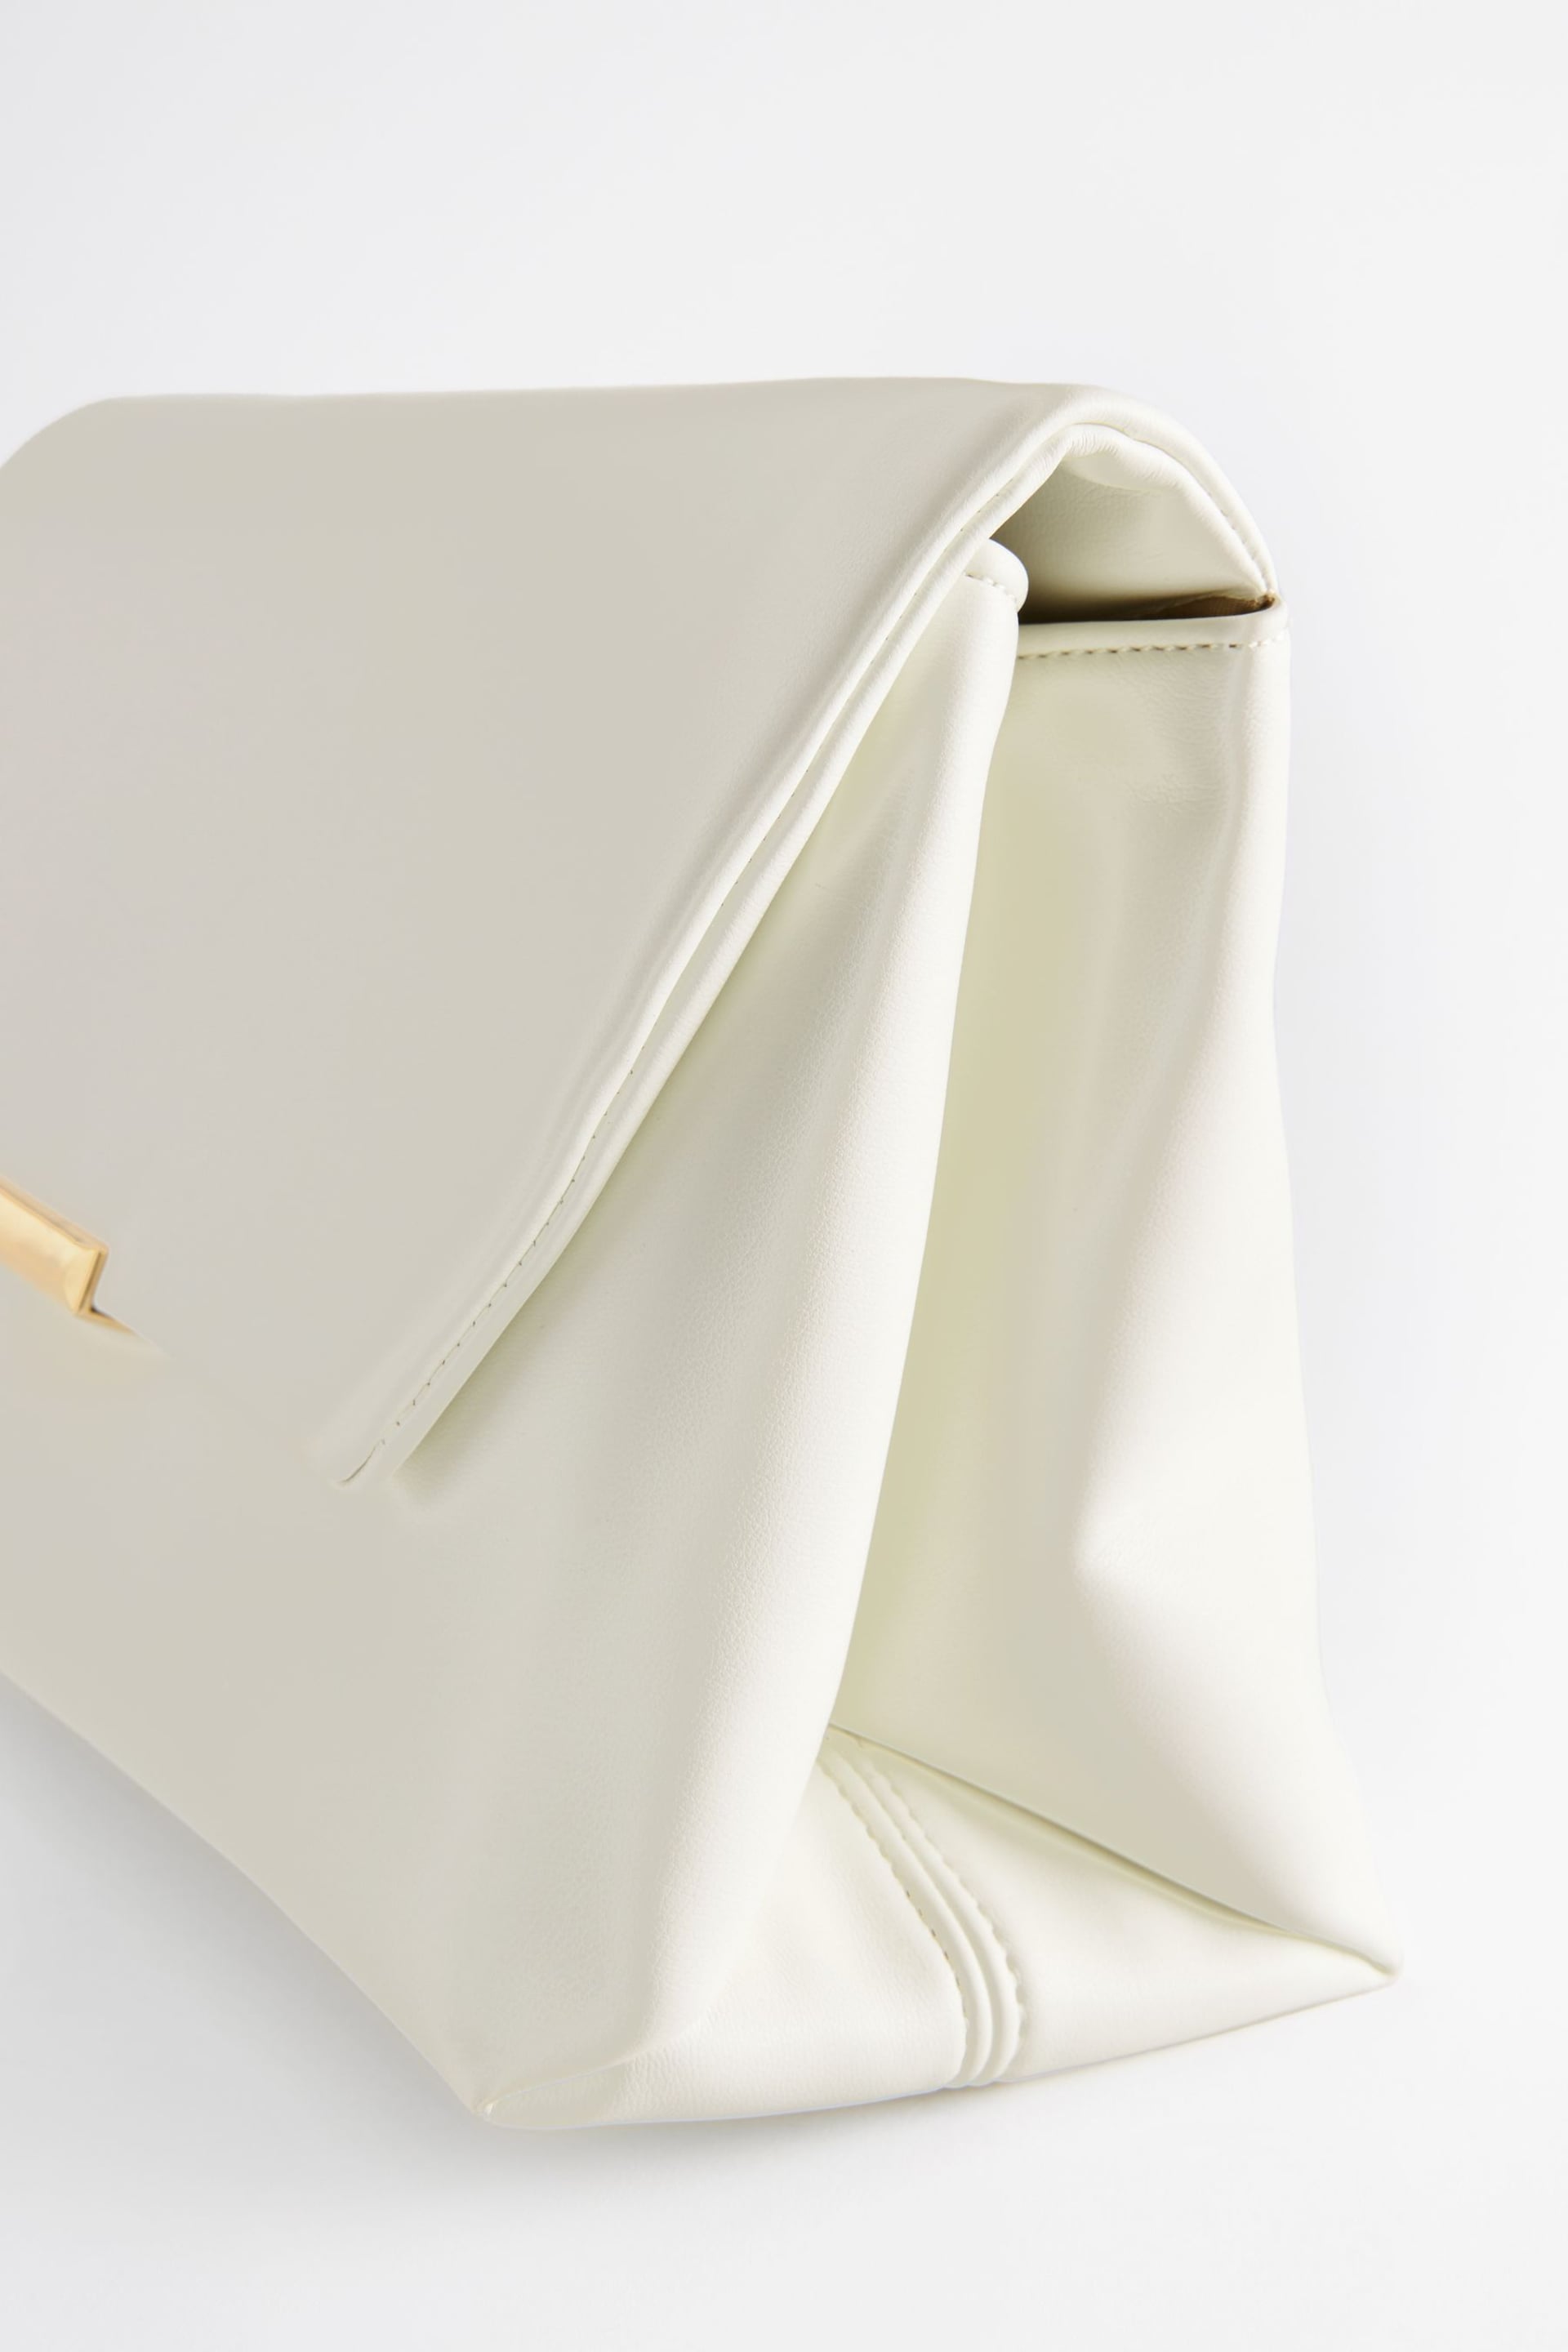 White Oversized White Clutch Bag - Image 6 of 7